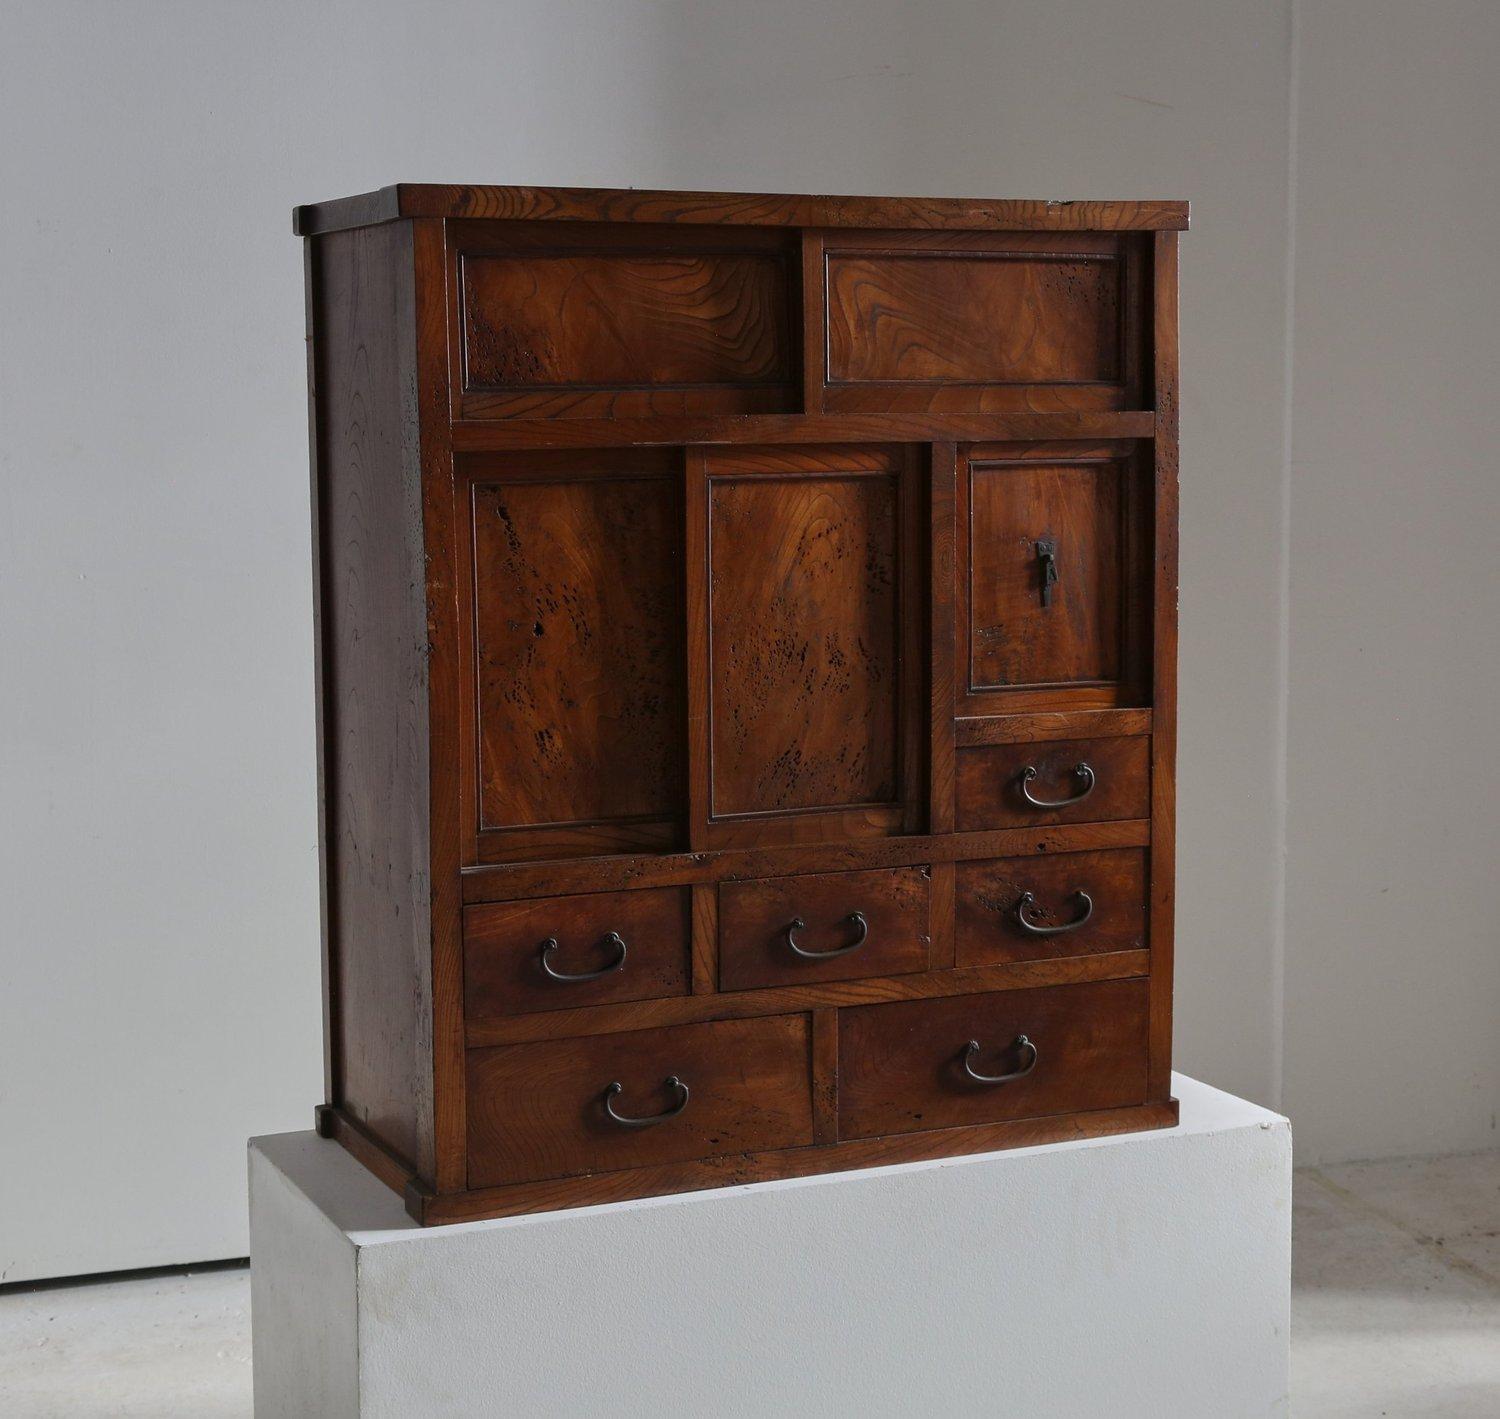 Early Twentieth Century Elm Burlwood Japanese cabinet.  

Constructed entirely of solid elm burlwood. Iron forged handles, blacksmith made. 

Very fine detailing and is incredibly well-made. Excellent grain pattern throughout. A rare usage of